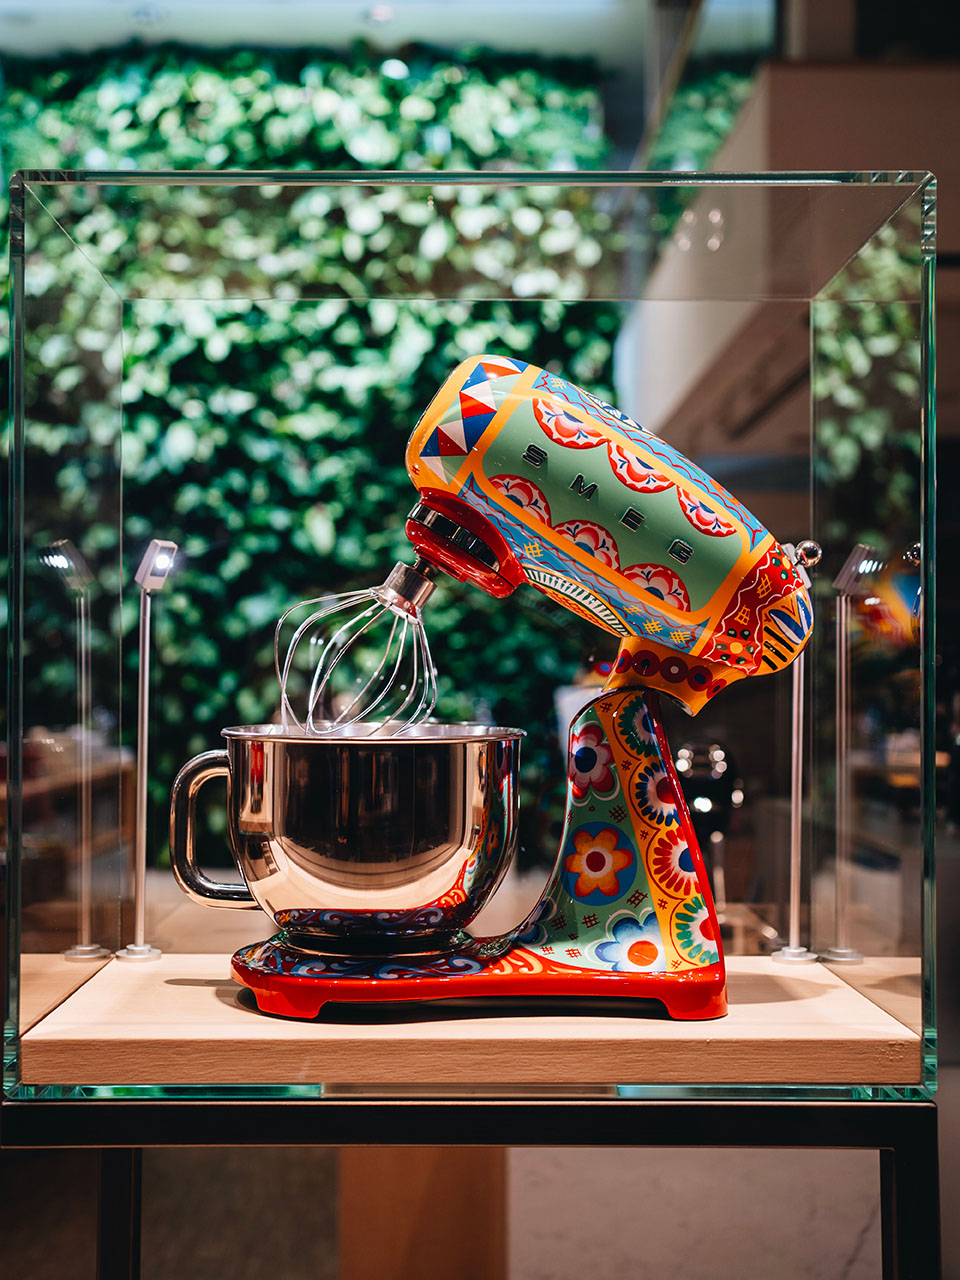 Smeg planetary mixer decorated with Dolce & Gabbana graphics